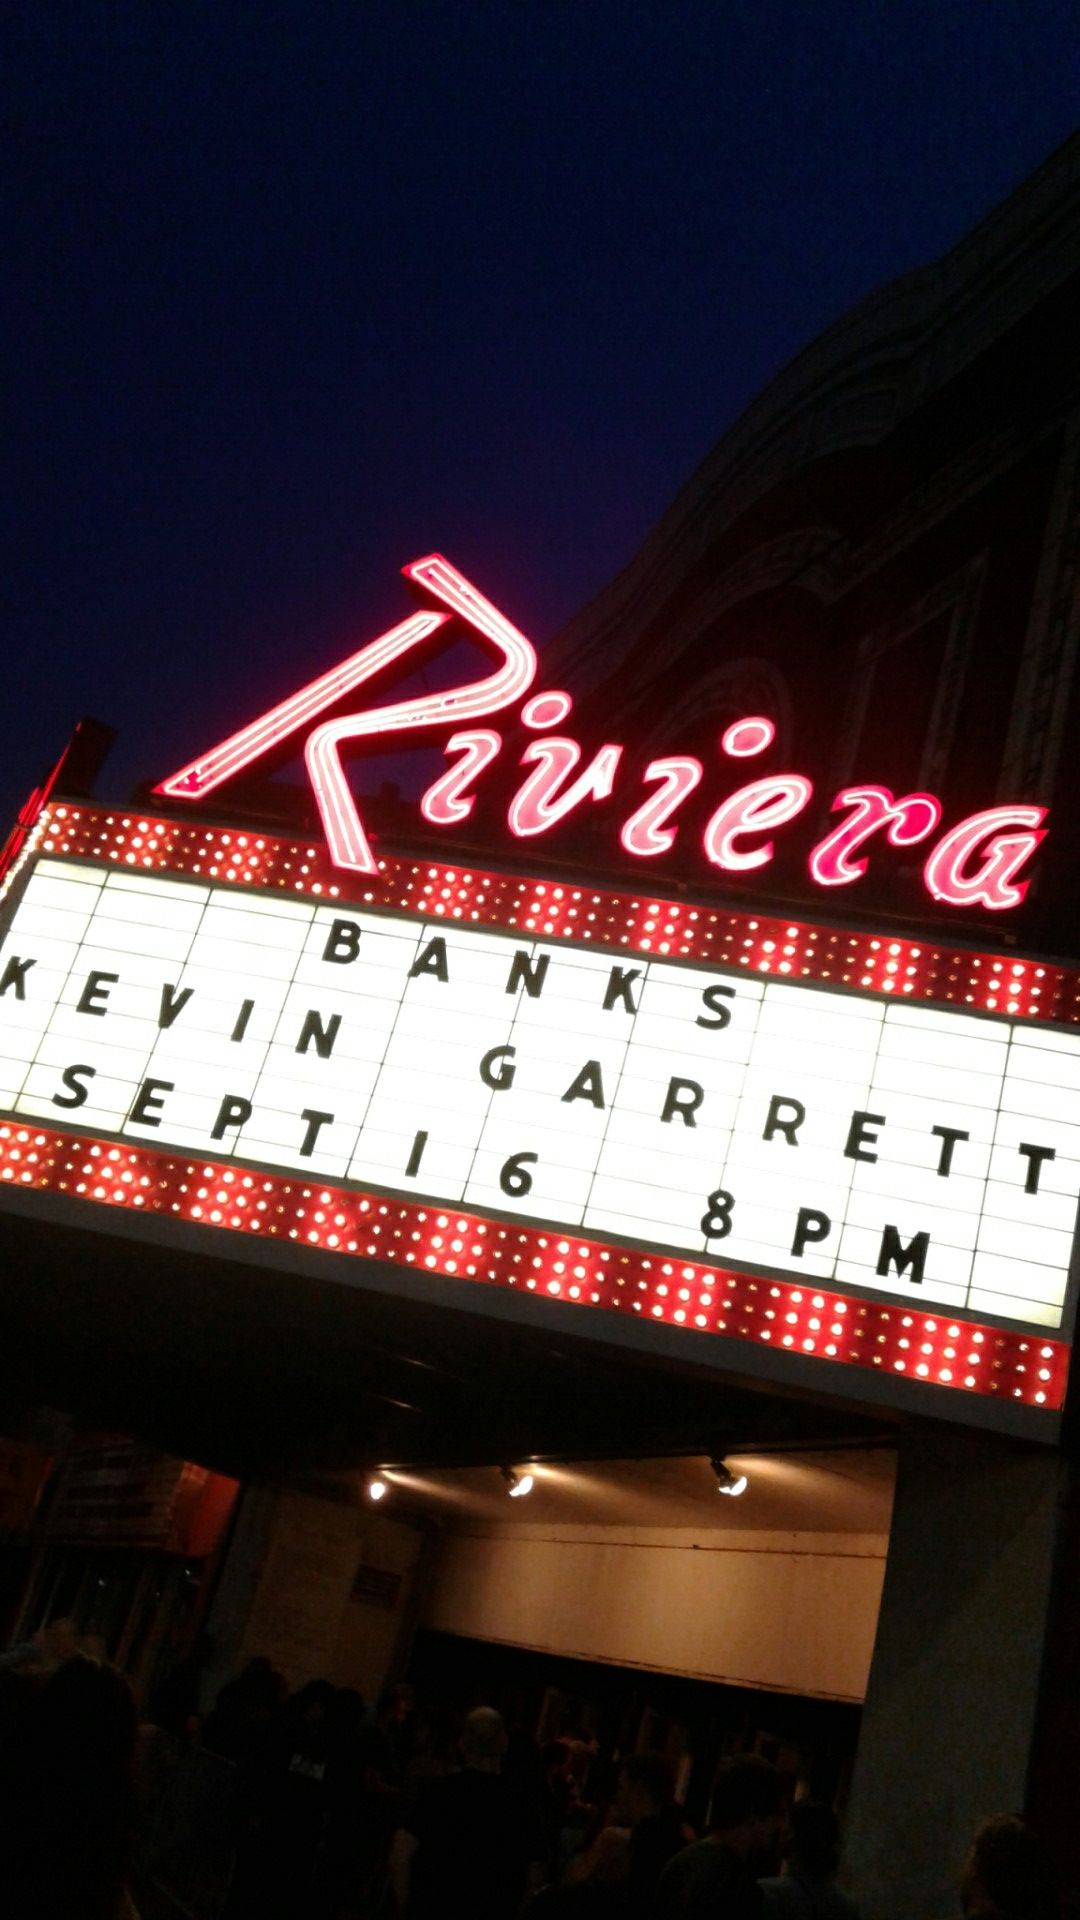 BANKS WITH KEVIN GARRET TICKETS FOR TONIGHT 9/16